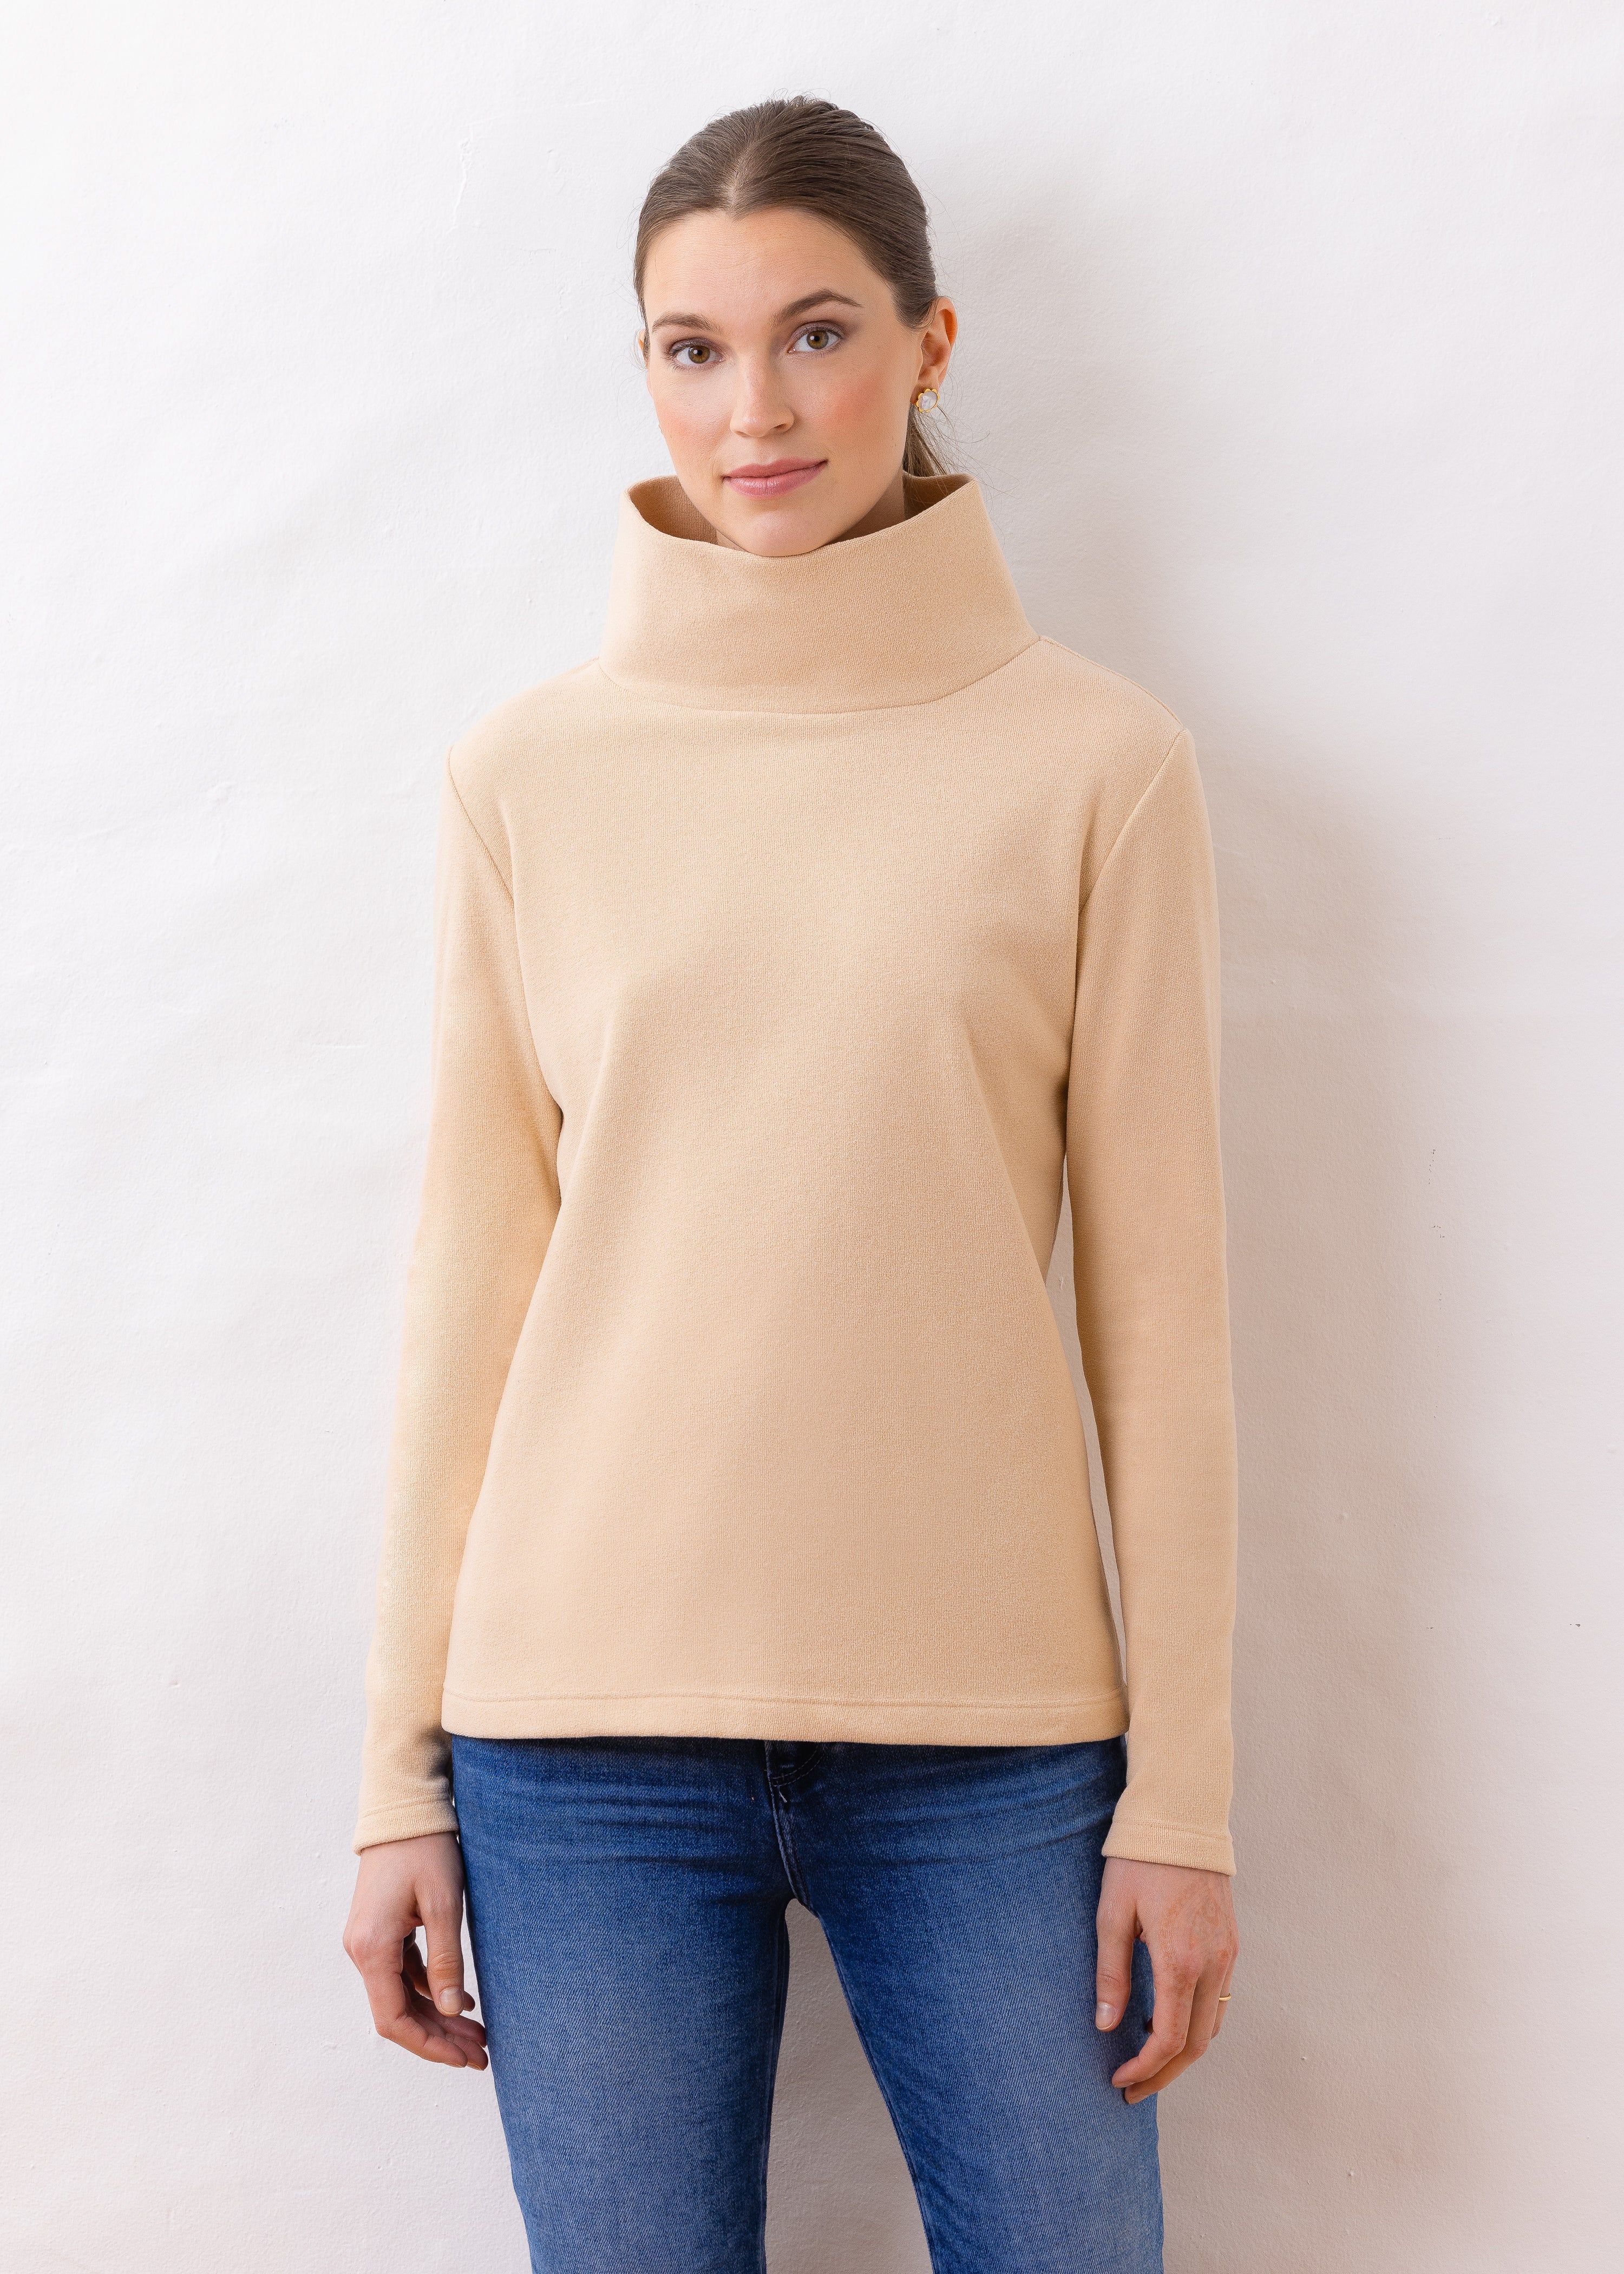 Greenpoint Turtleneck in Terry Fleece (Natural Blush) | Dudley Stephens